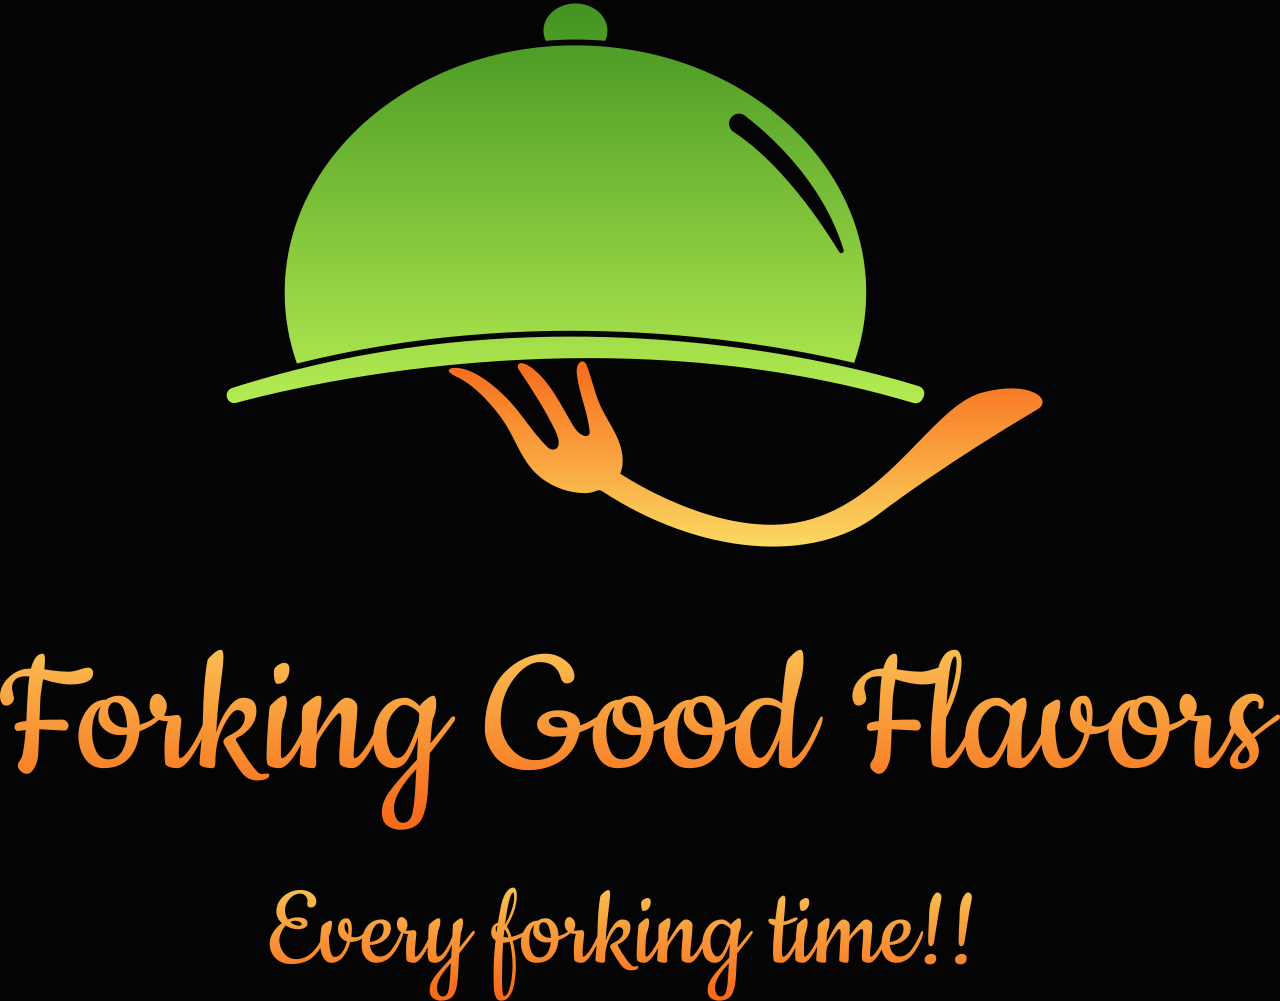 Forking Good Flavors's logo